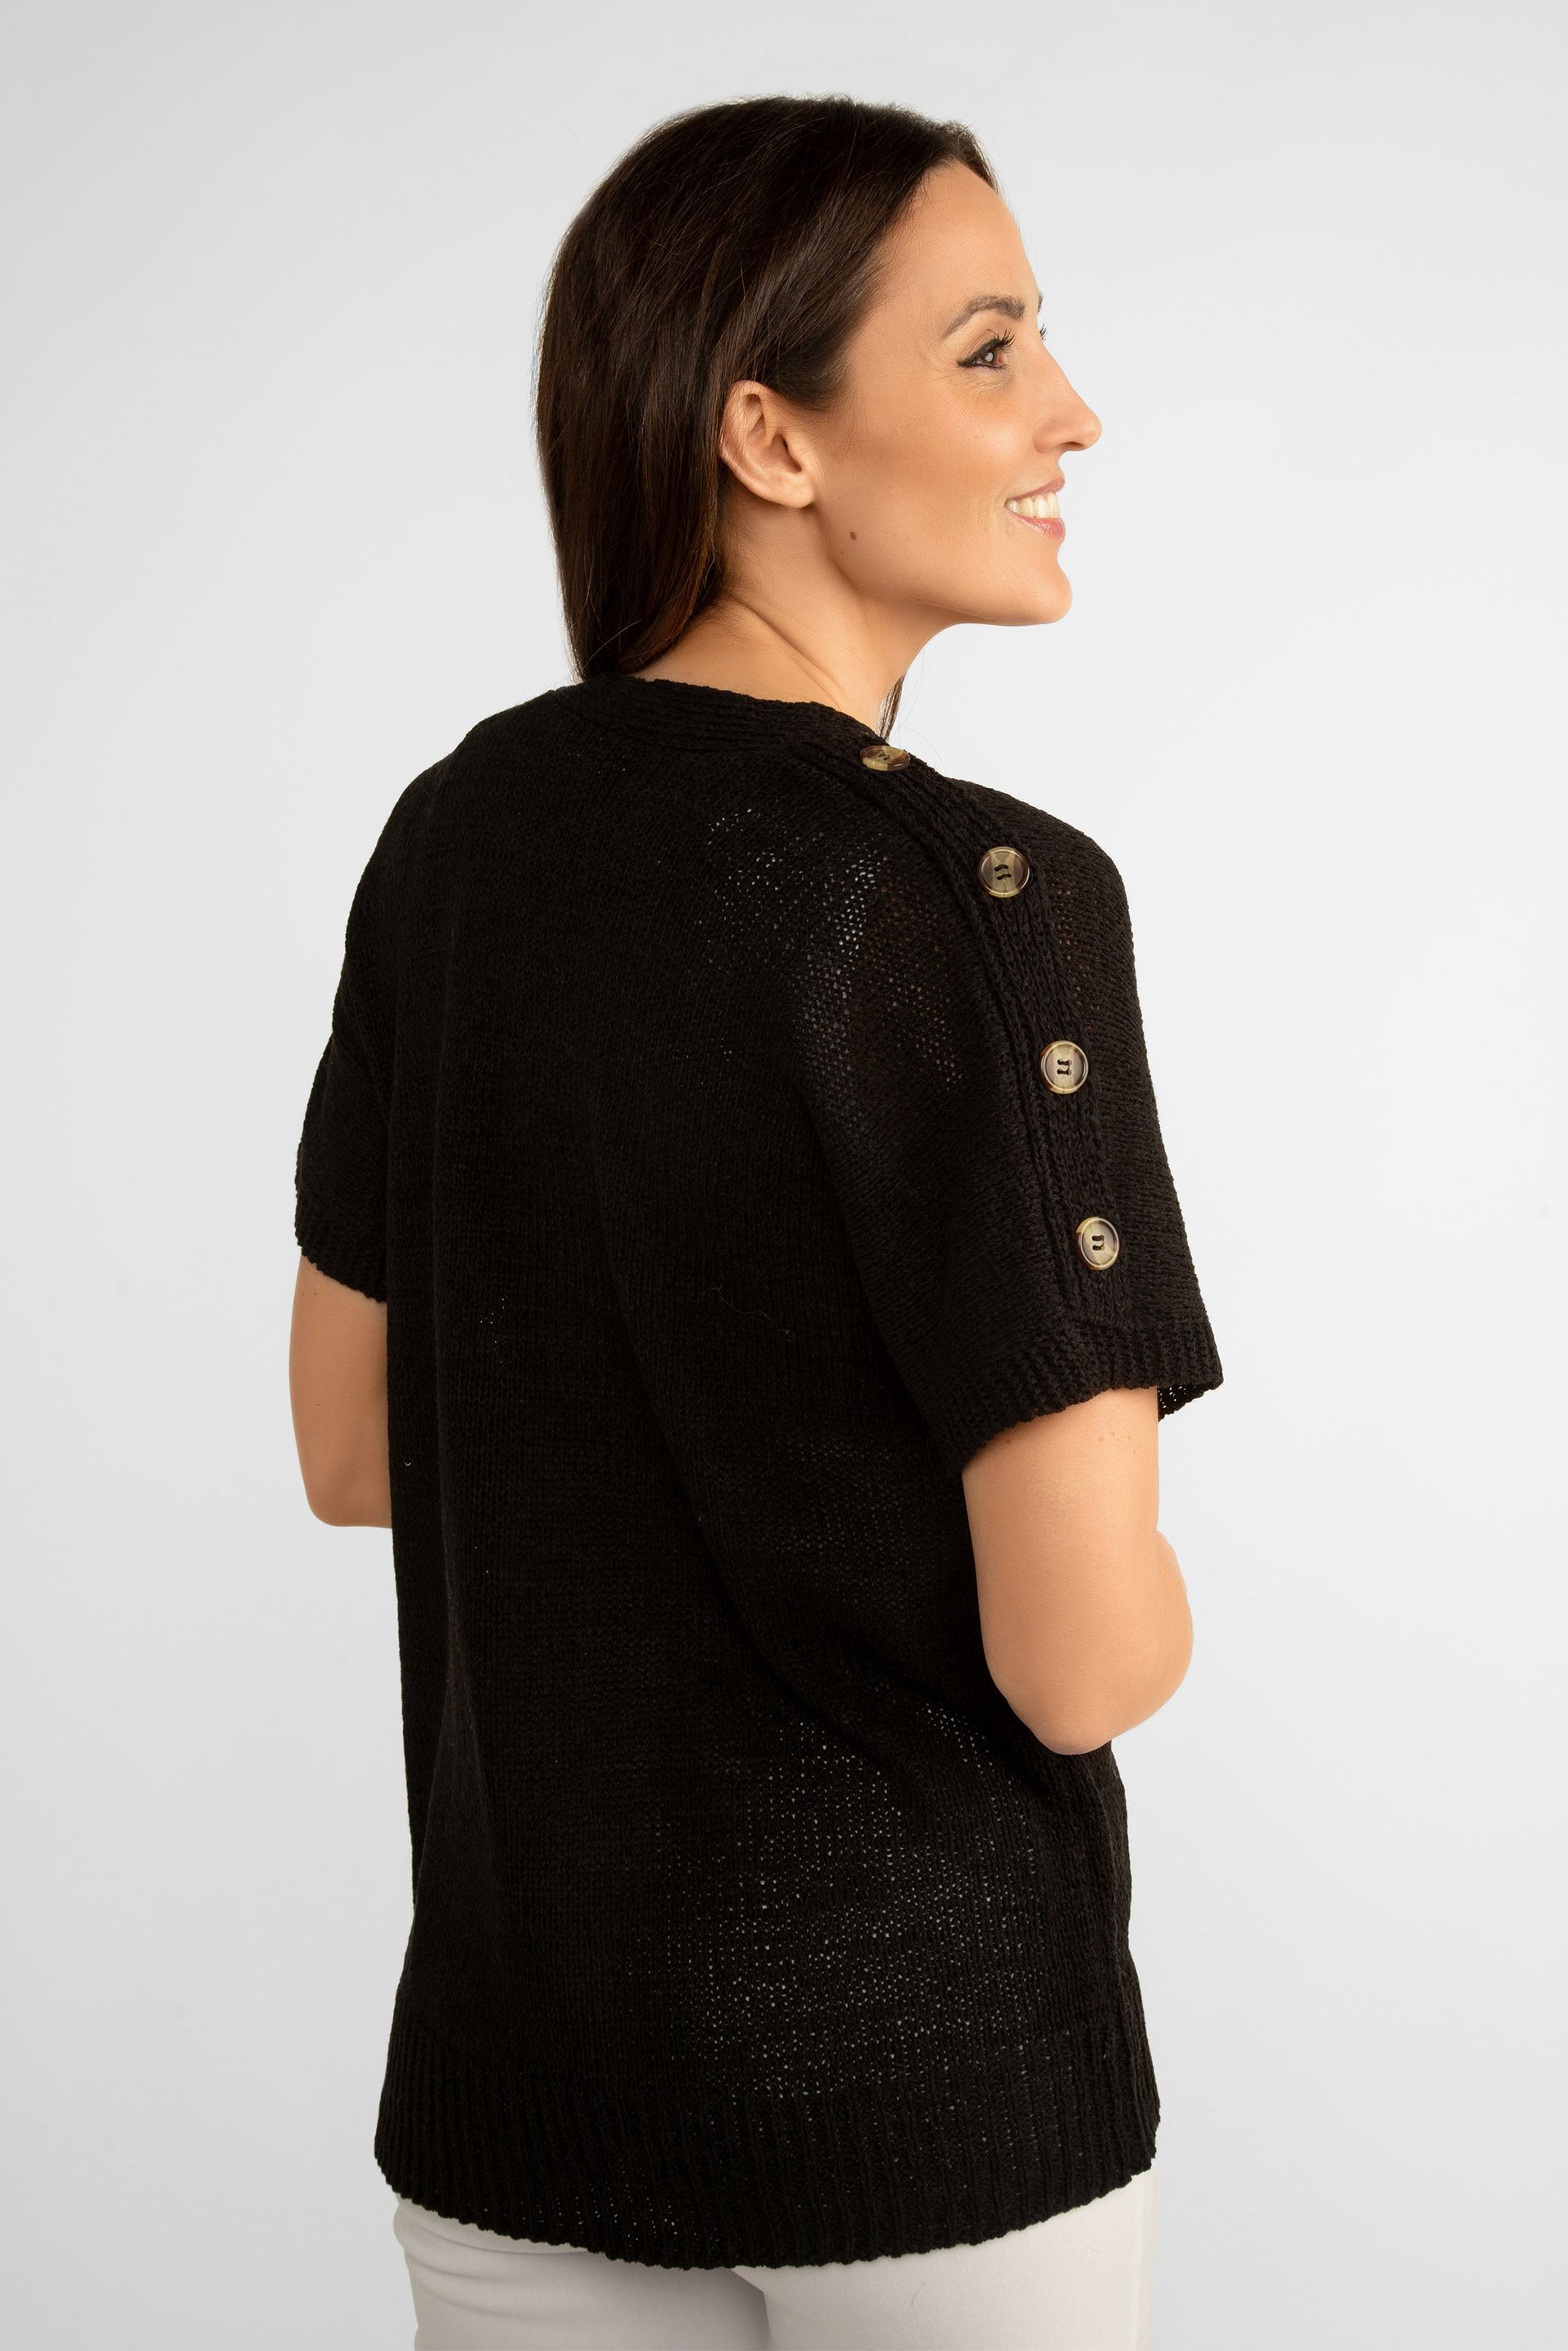 Back view of Spence Women's Short Sleeve Button Shoulder Open Cardigan in Black